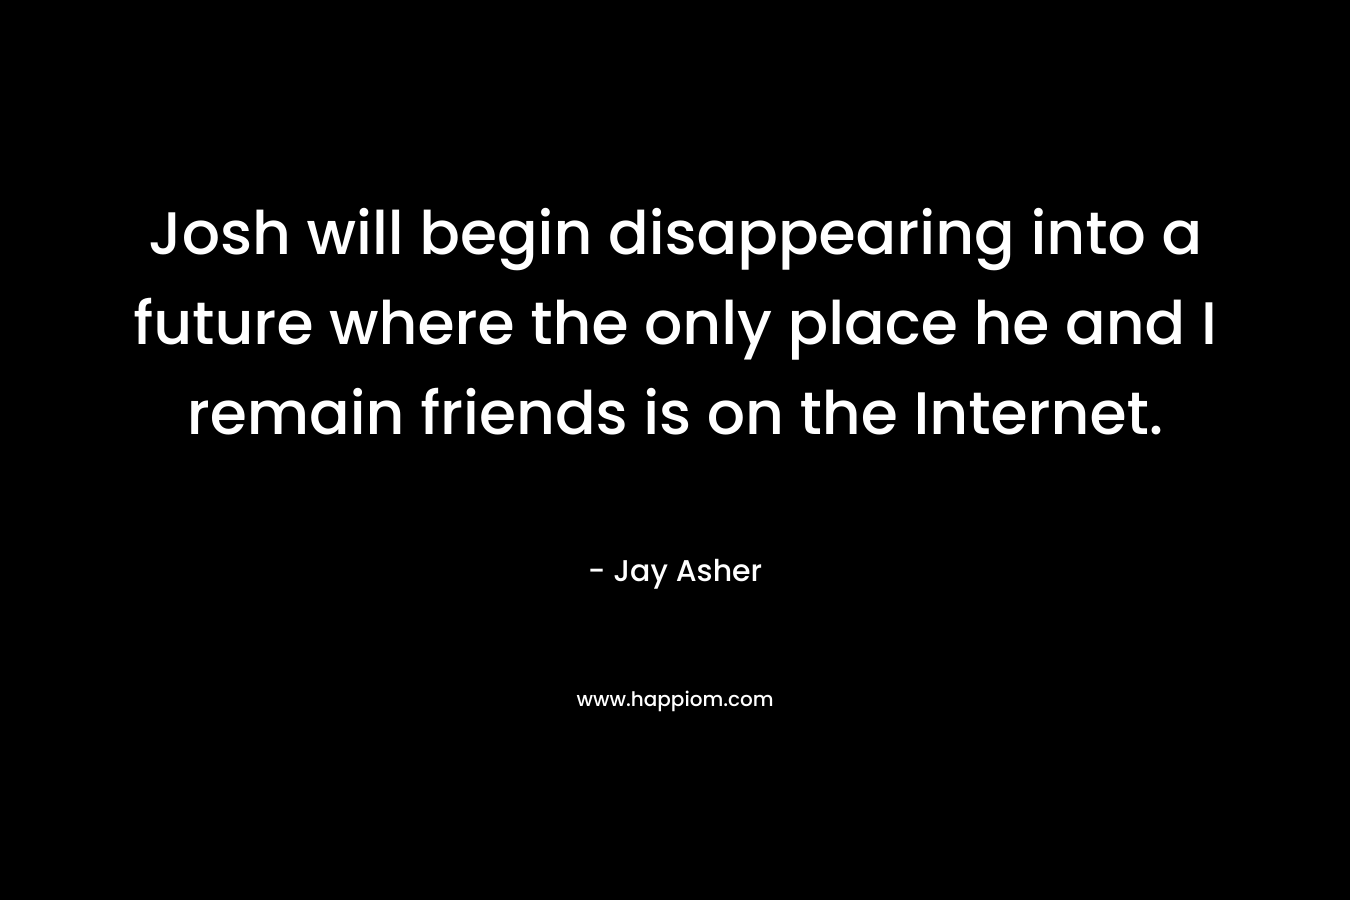 Josh will begin disappearing into a future where the only place he and I remain friends is on the Internet. – Jay Asher